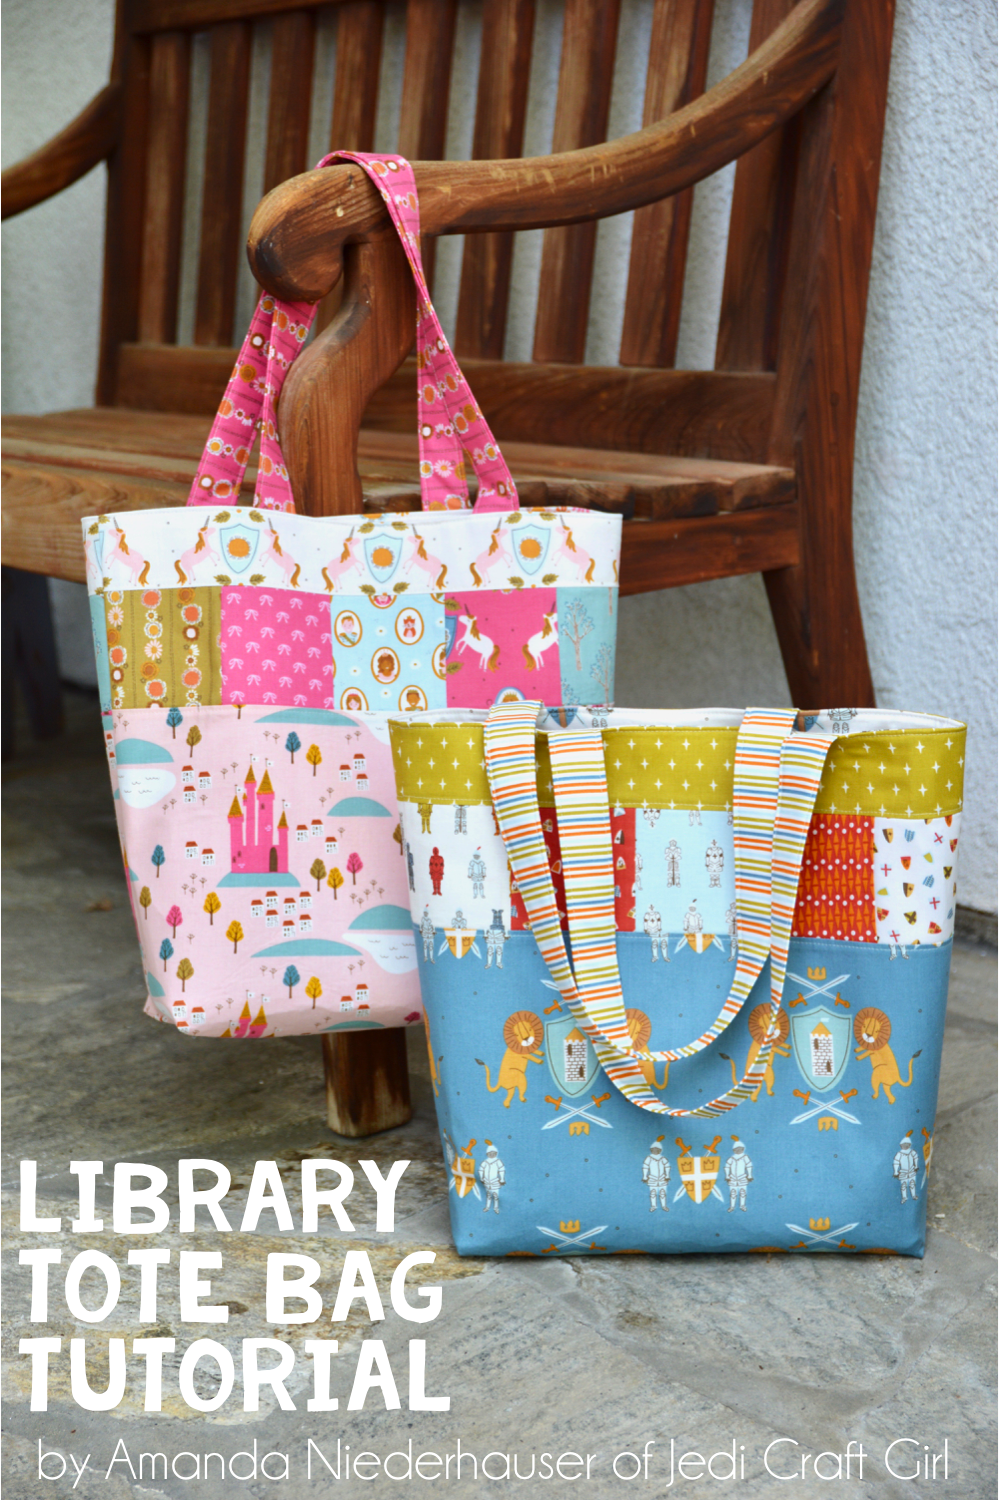 http://www.jedicraftgirl.com/wp-content/uploads/2018/05/library-tote-bag-tutorial.png